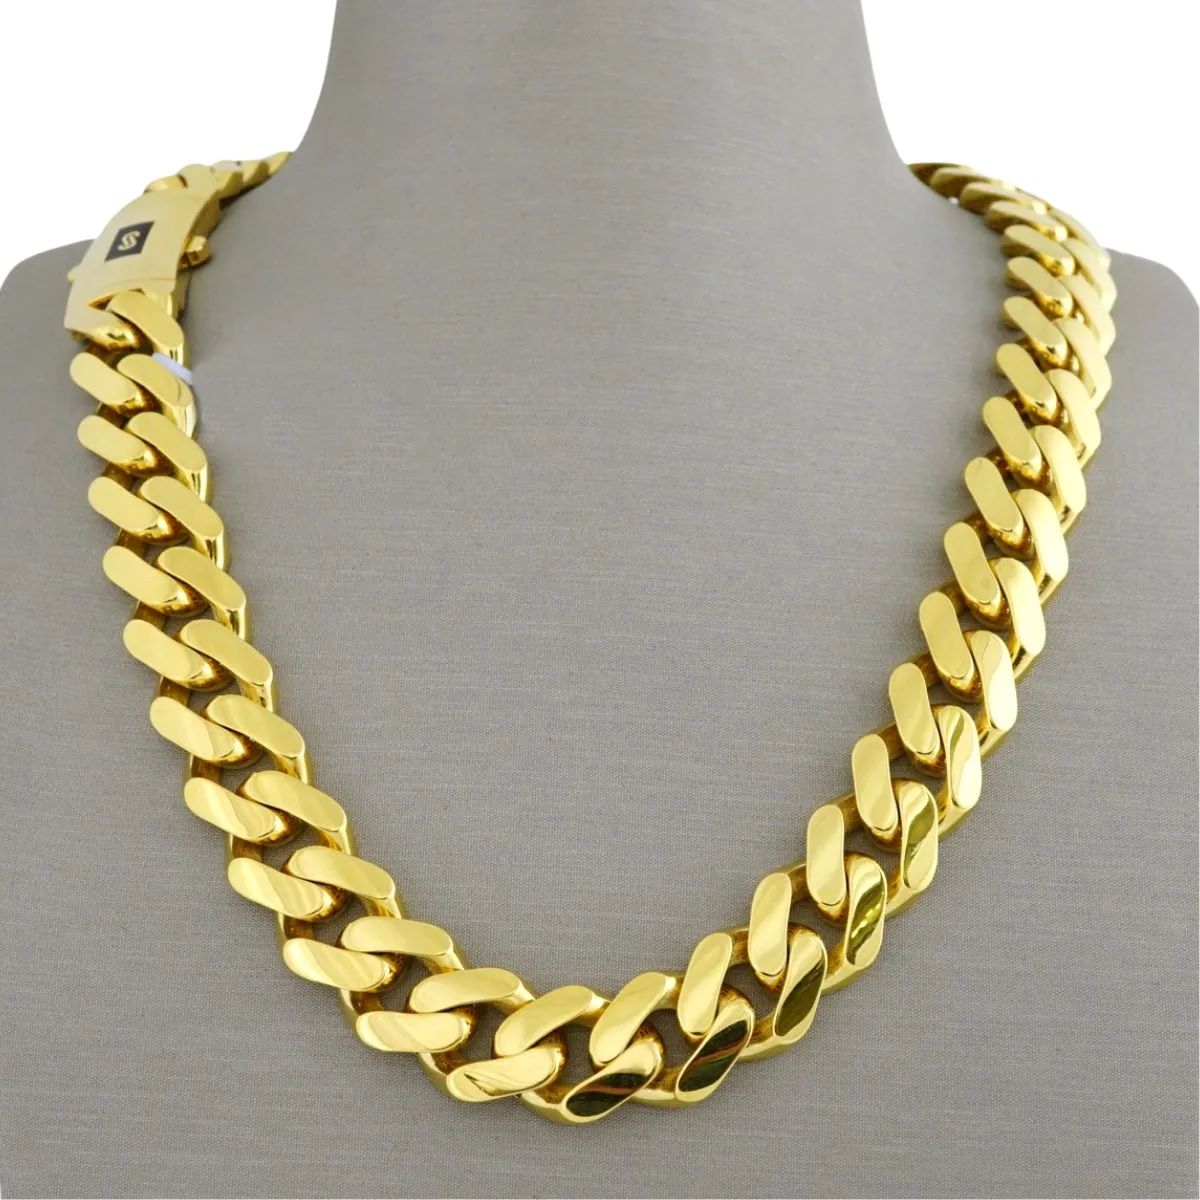 How To Store Gold Chains